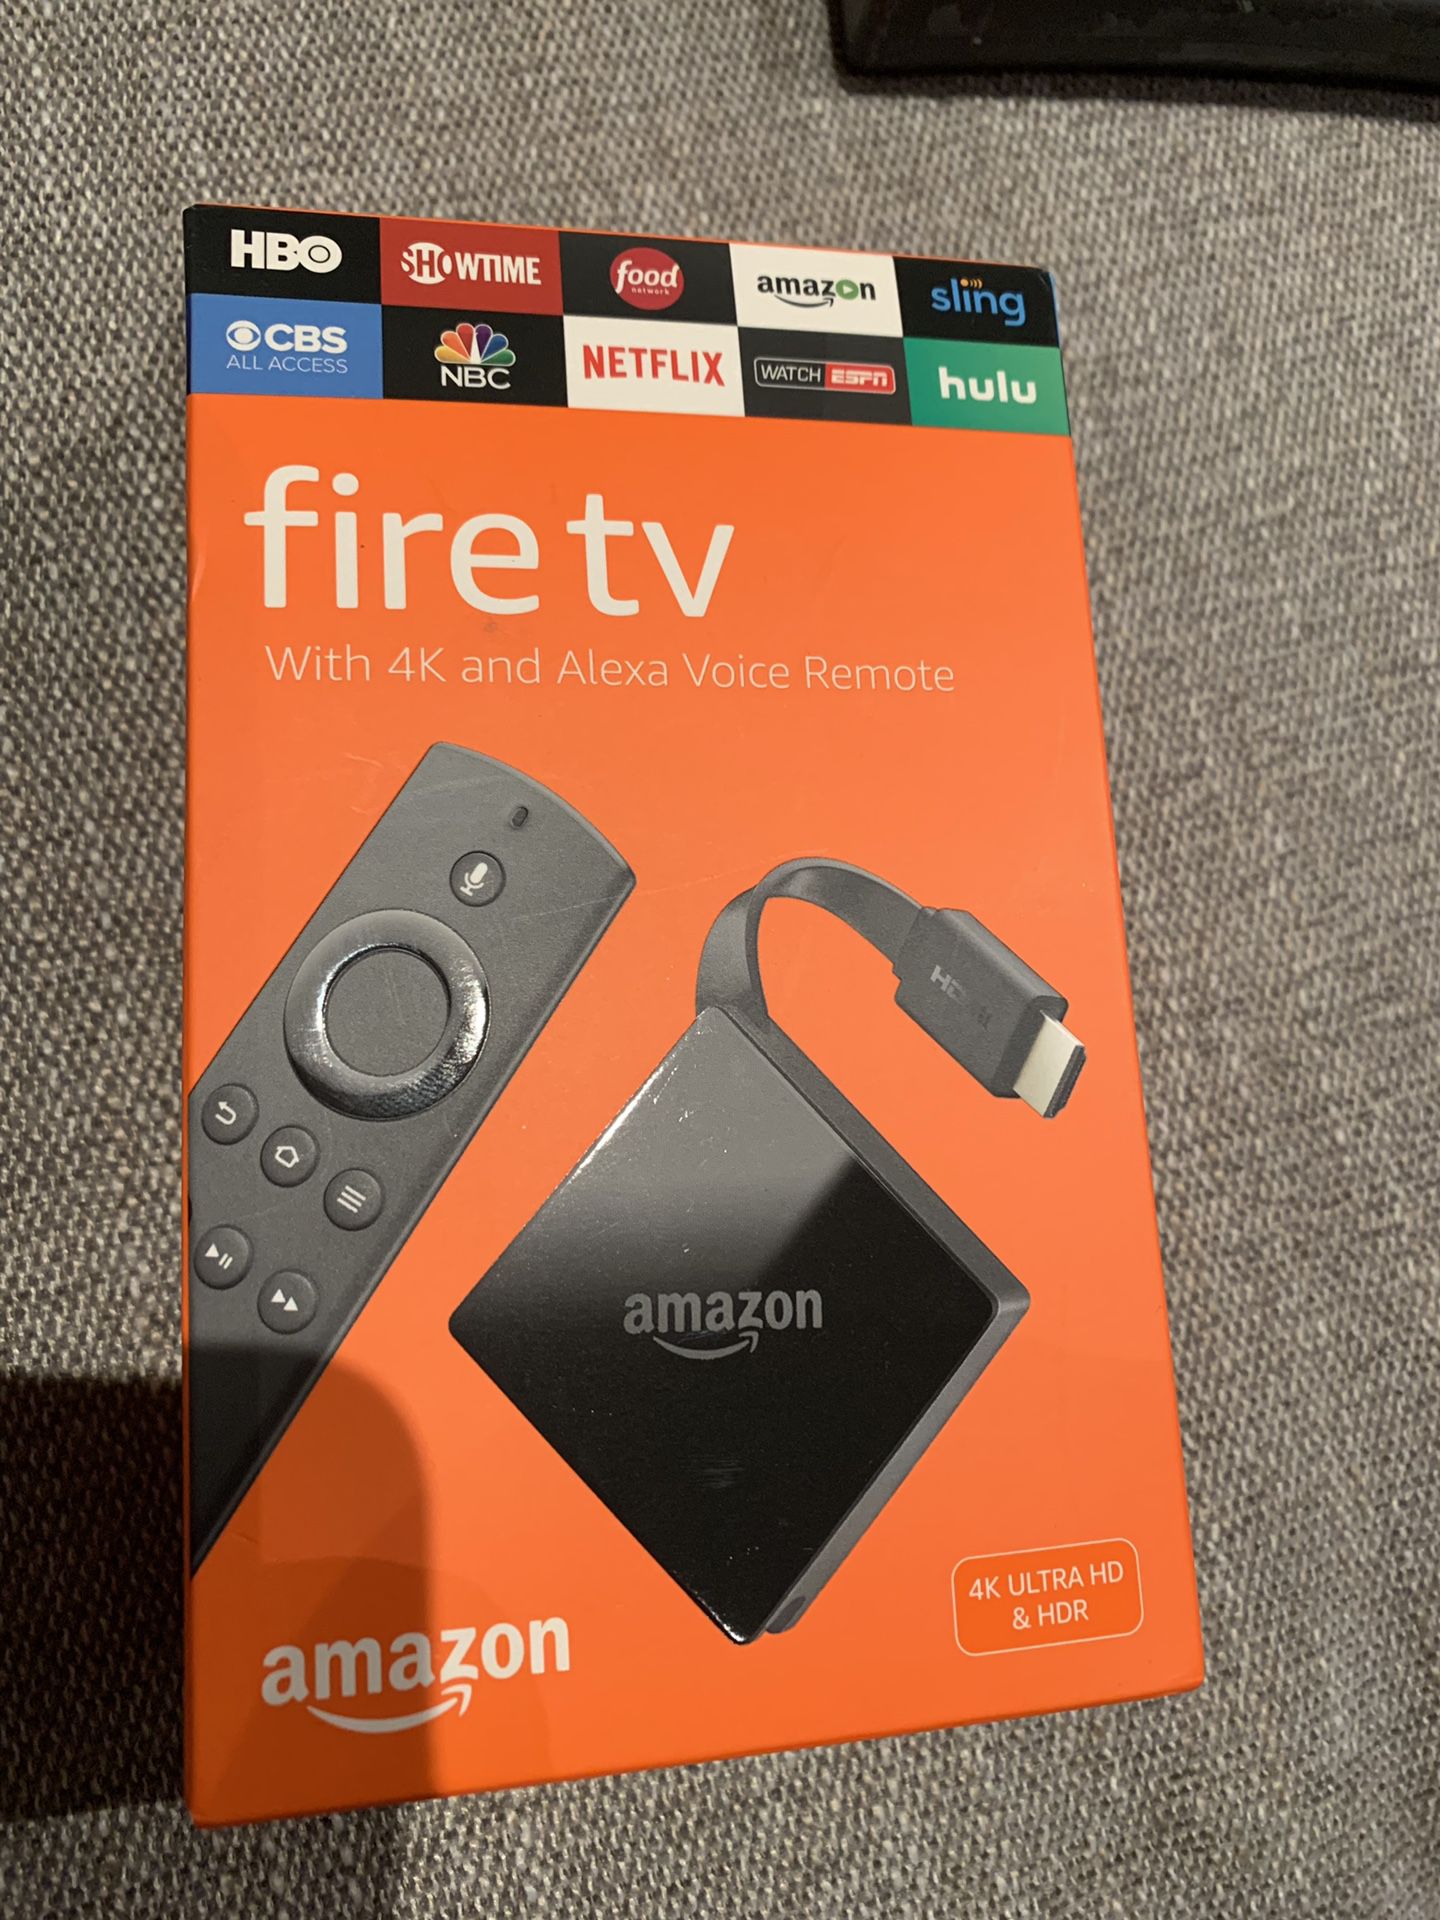 Fire tv 4K ultra HD and hdr Alexa voice remote